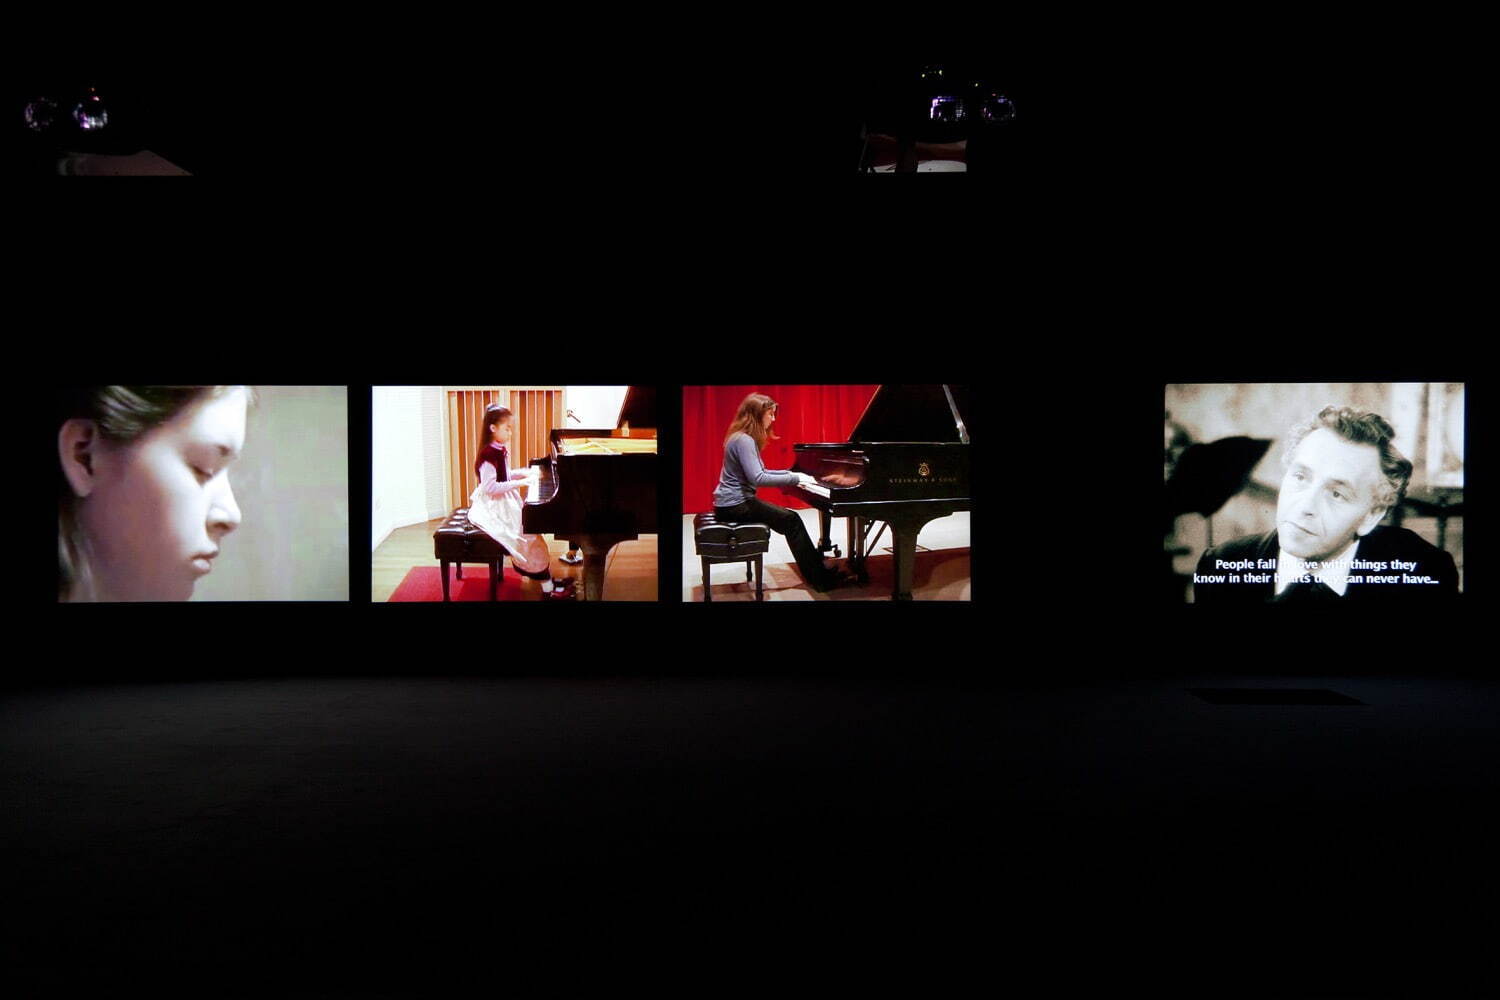 Dara Birnbaum, <i width="1500" height="1000">Arabesque</i>, 2011
Four-channel video installation (color, four-channel stereo sound, 6:26 min.); dimensions variable
Installation, Marian Goodman Gallery, New York, 2011
Courtesy of the artist and Marian Goodman Gallery
Copyright: Dara Birnbaum / Photo credit: John Berens